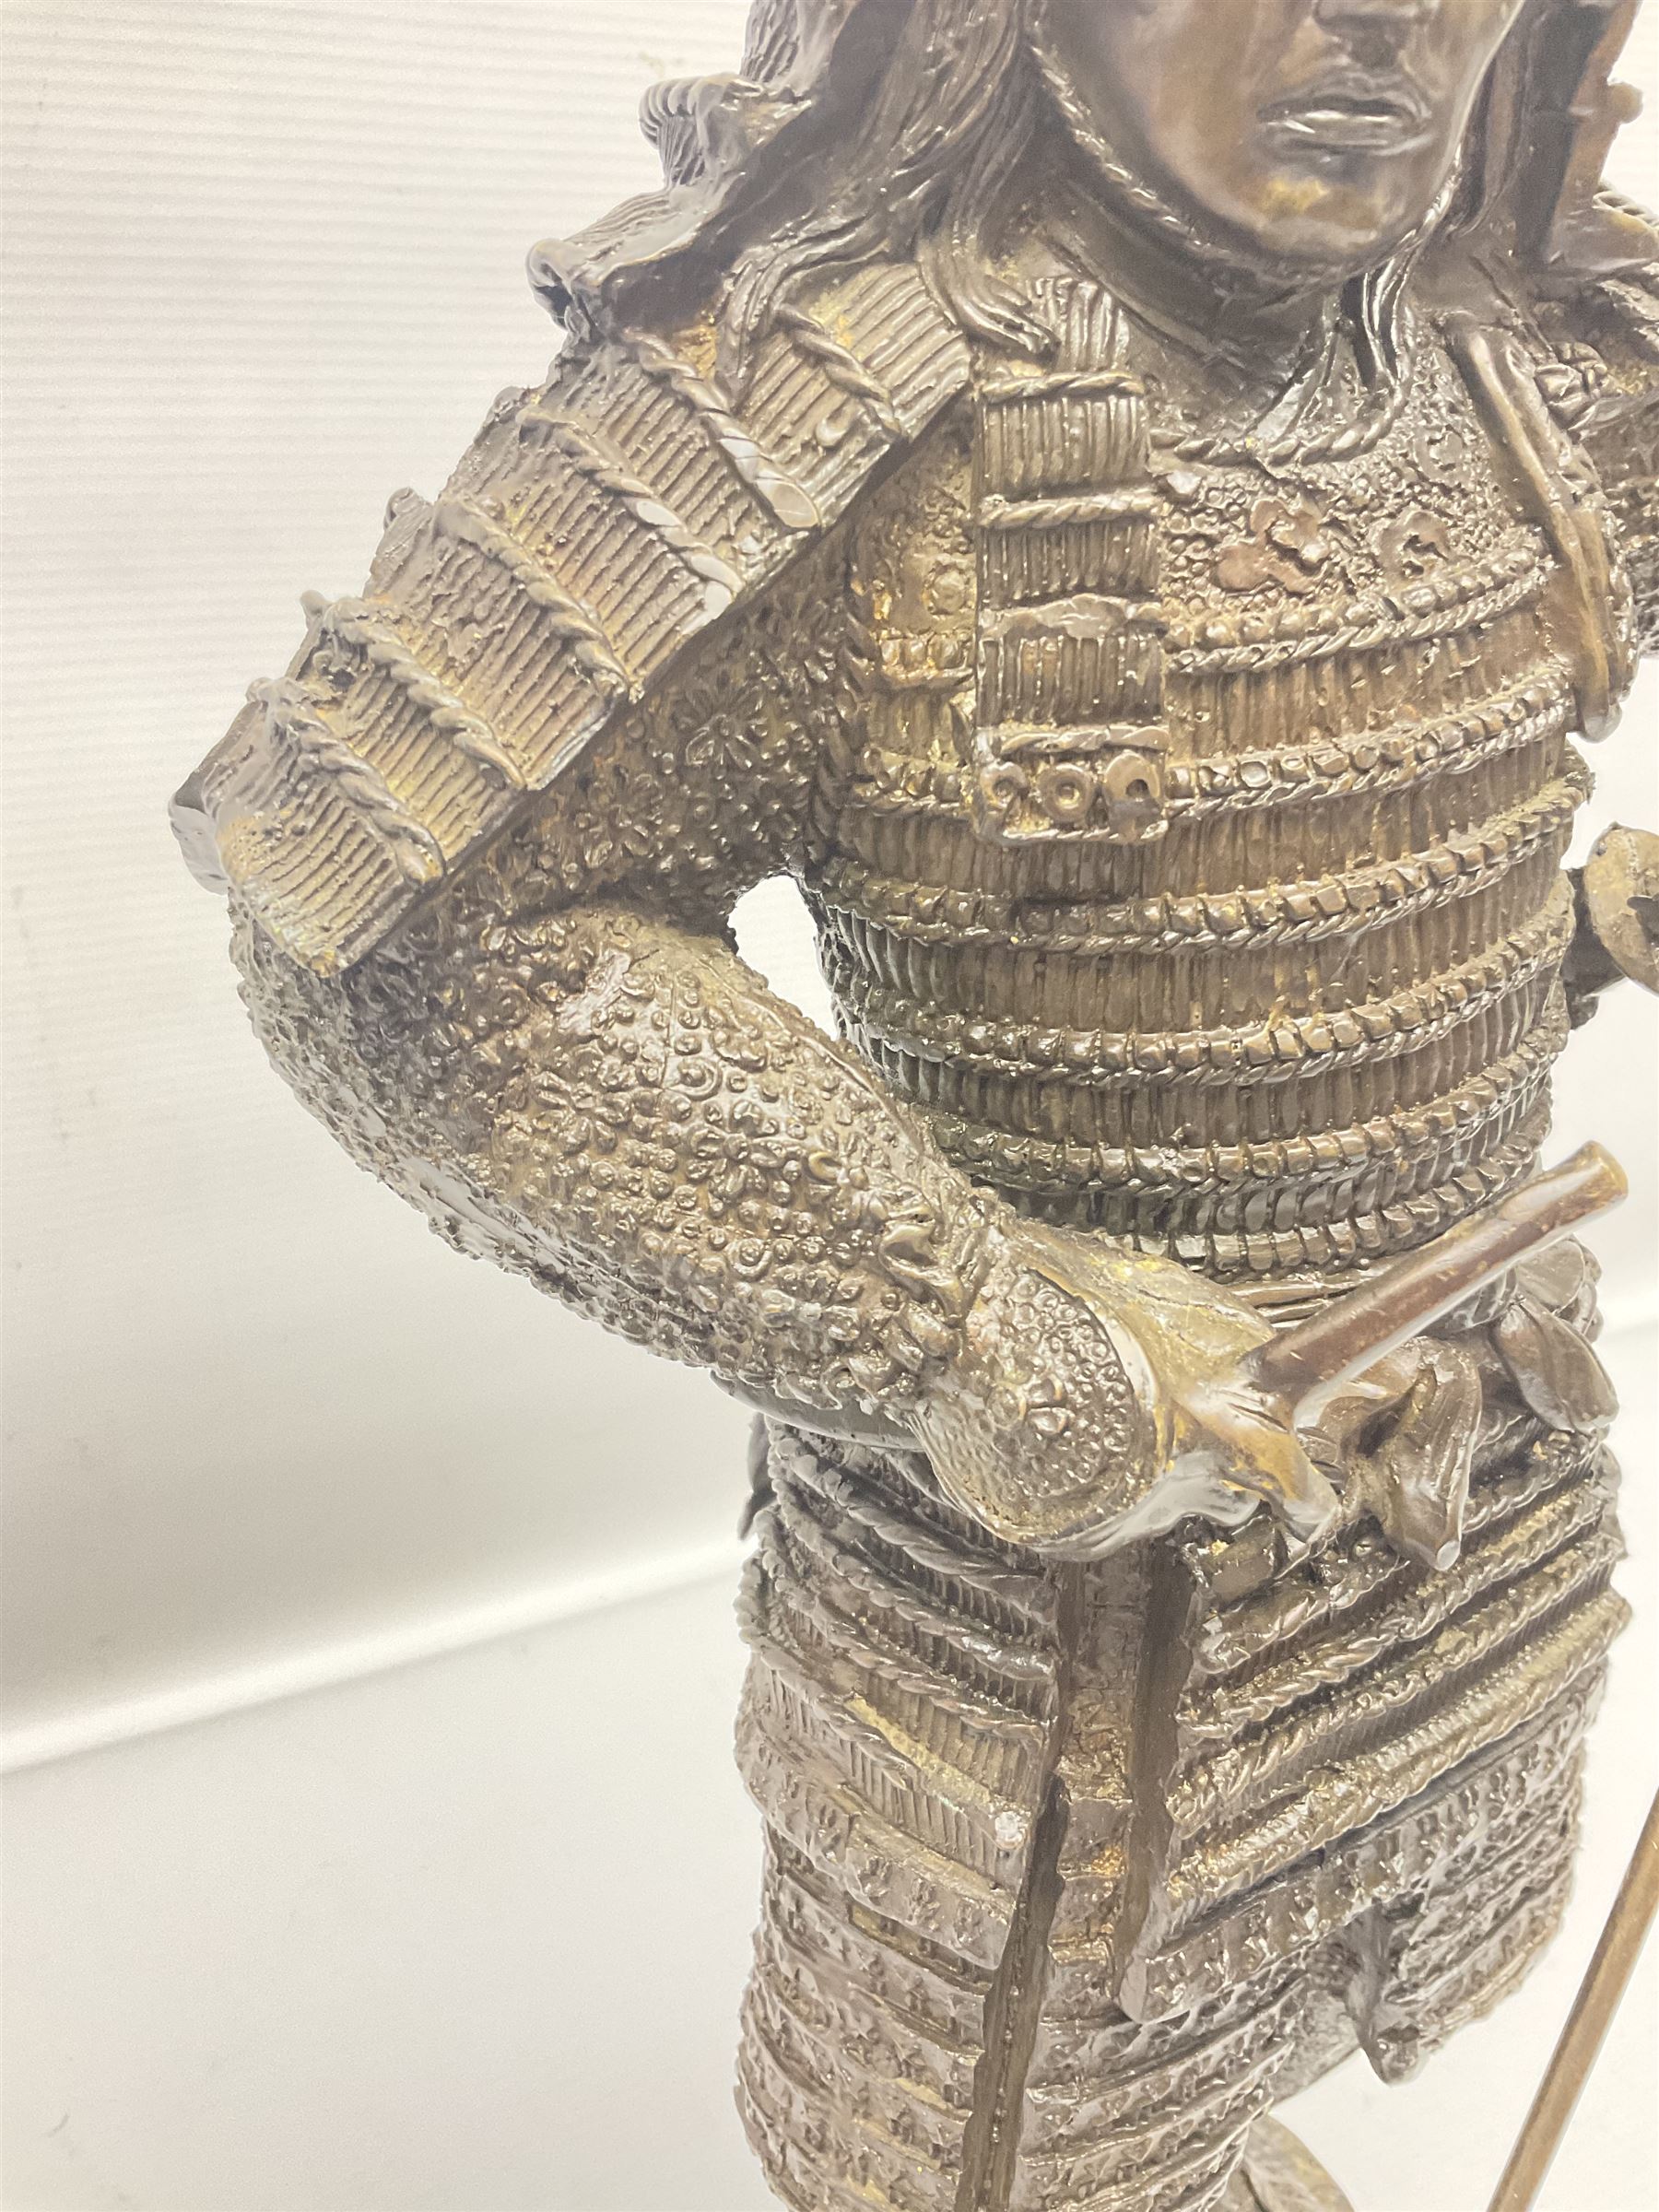 Bronze figure of a samurai standing wearing armour and holding a naginata - Image 7 of 9